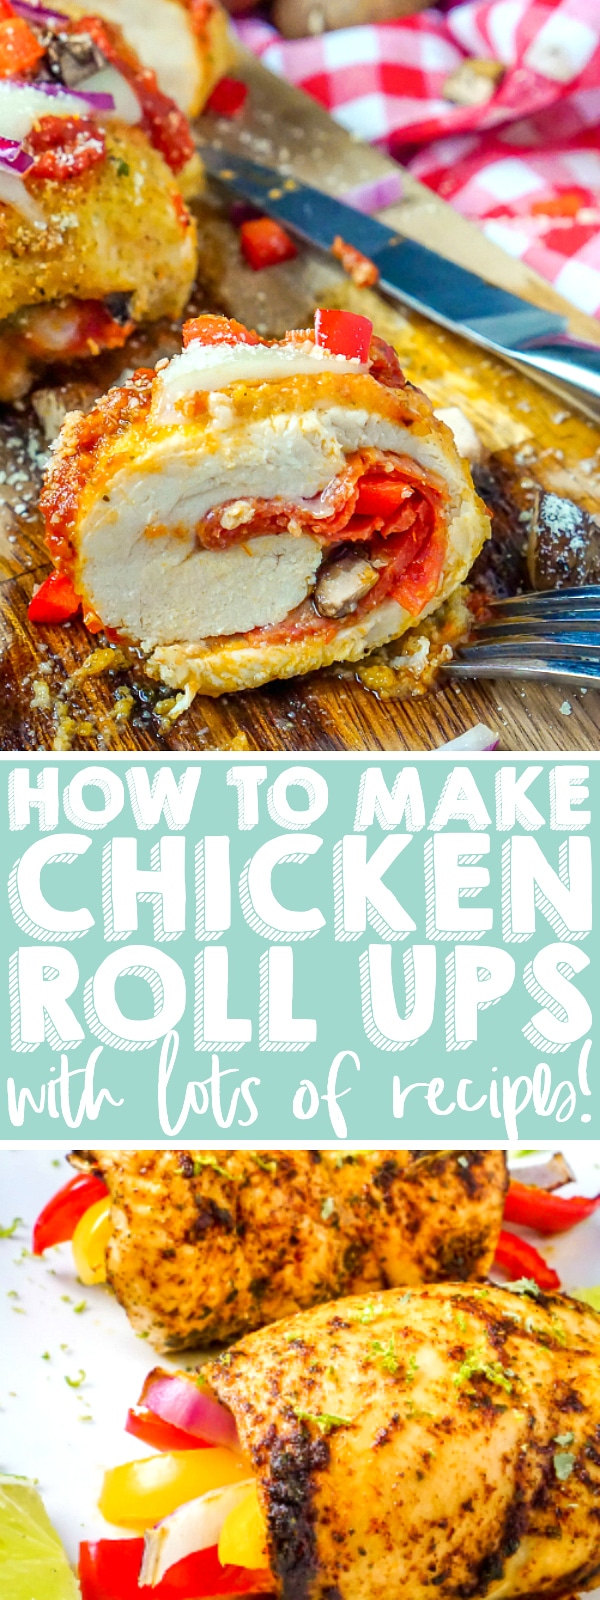 How to Make Chicken Roll Ups - All the information you need on how to cook chicken roll ups, including how to freeze them, how to cook them in an air fryer or instant pot, and tons of chicken roll up recipes to try! | The Love Nerds #stuffedchicken #chickenbreastfreezermeal